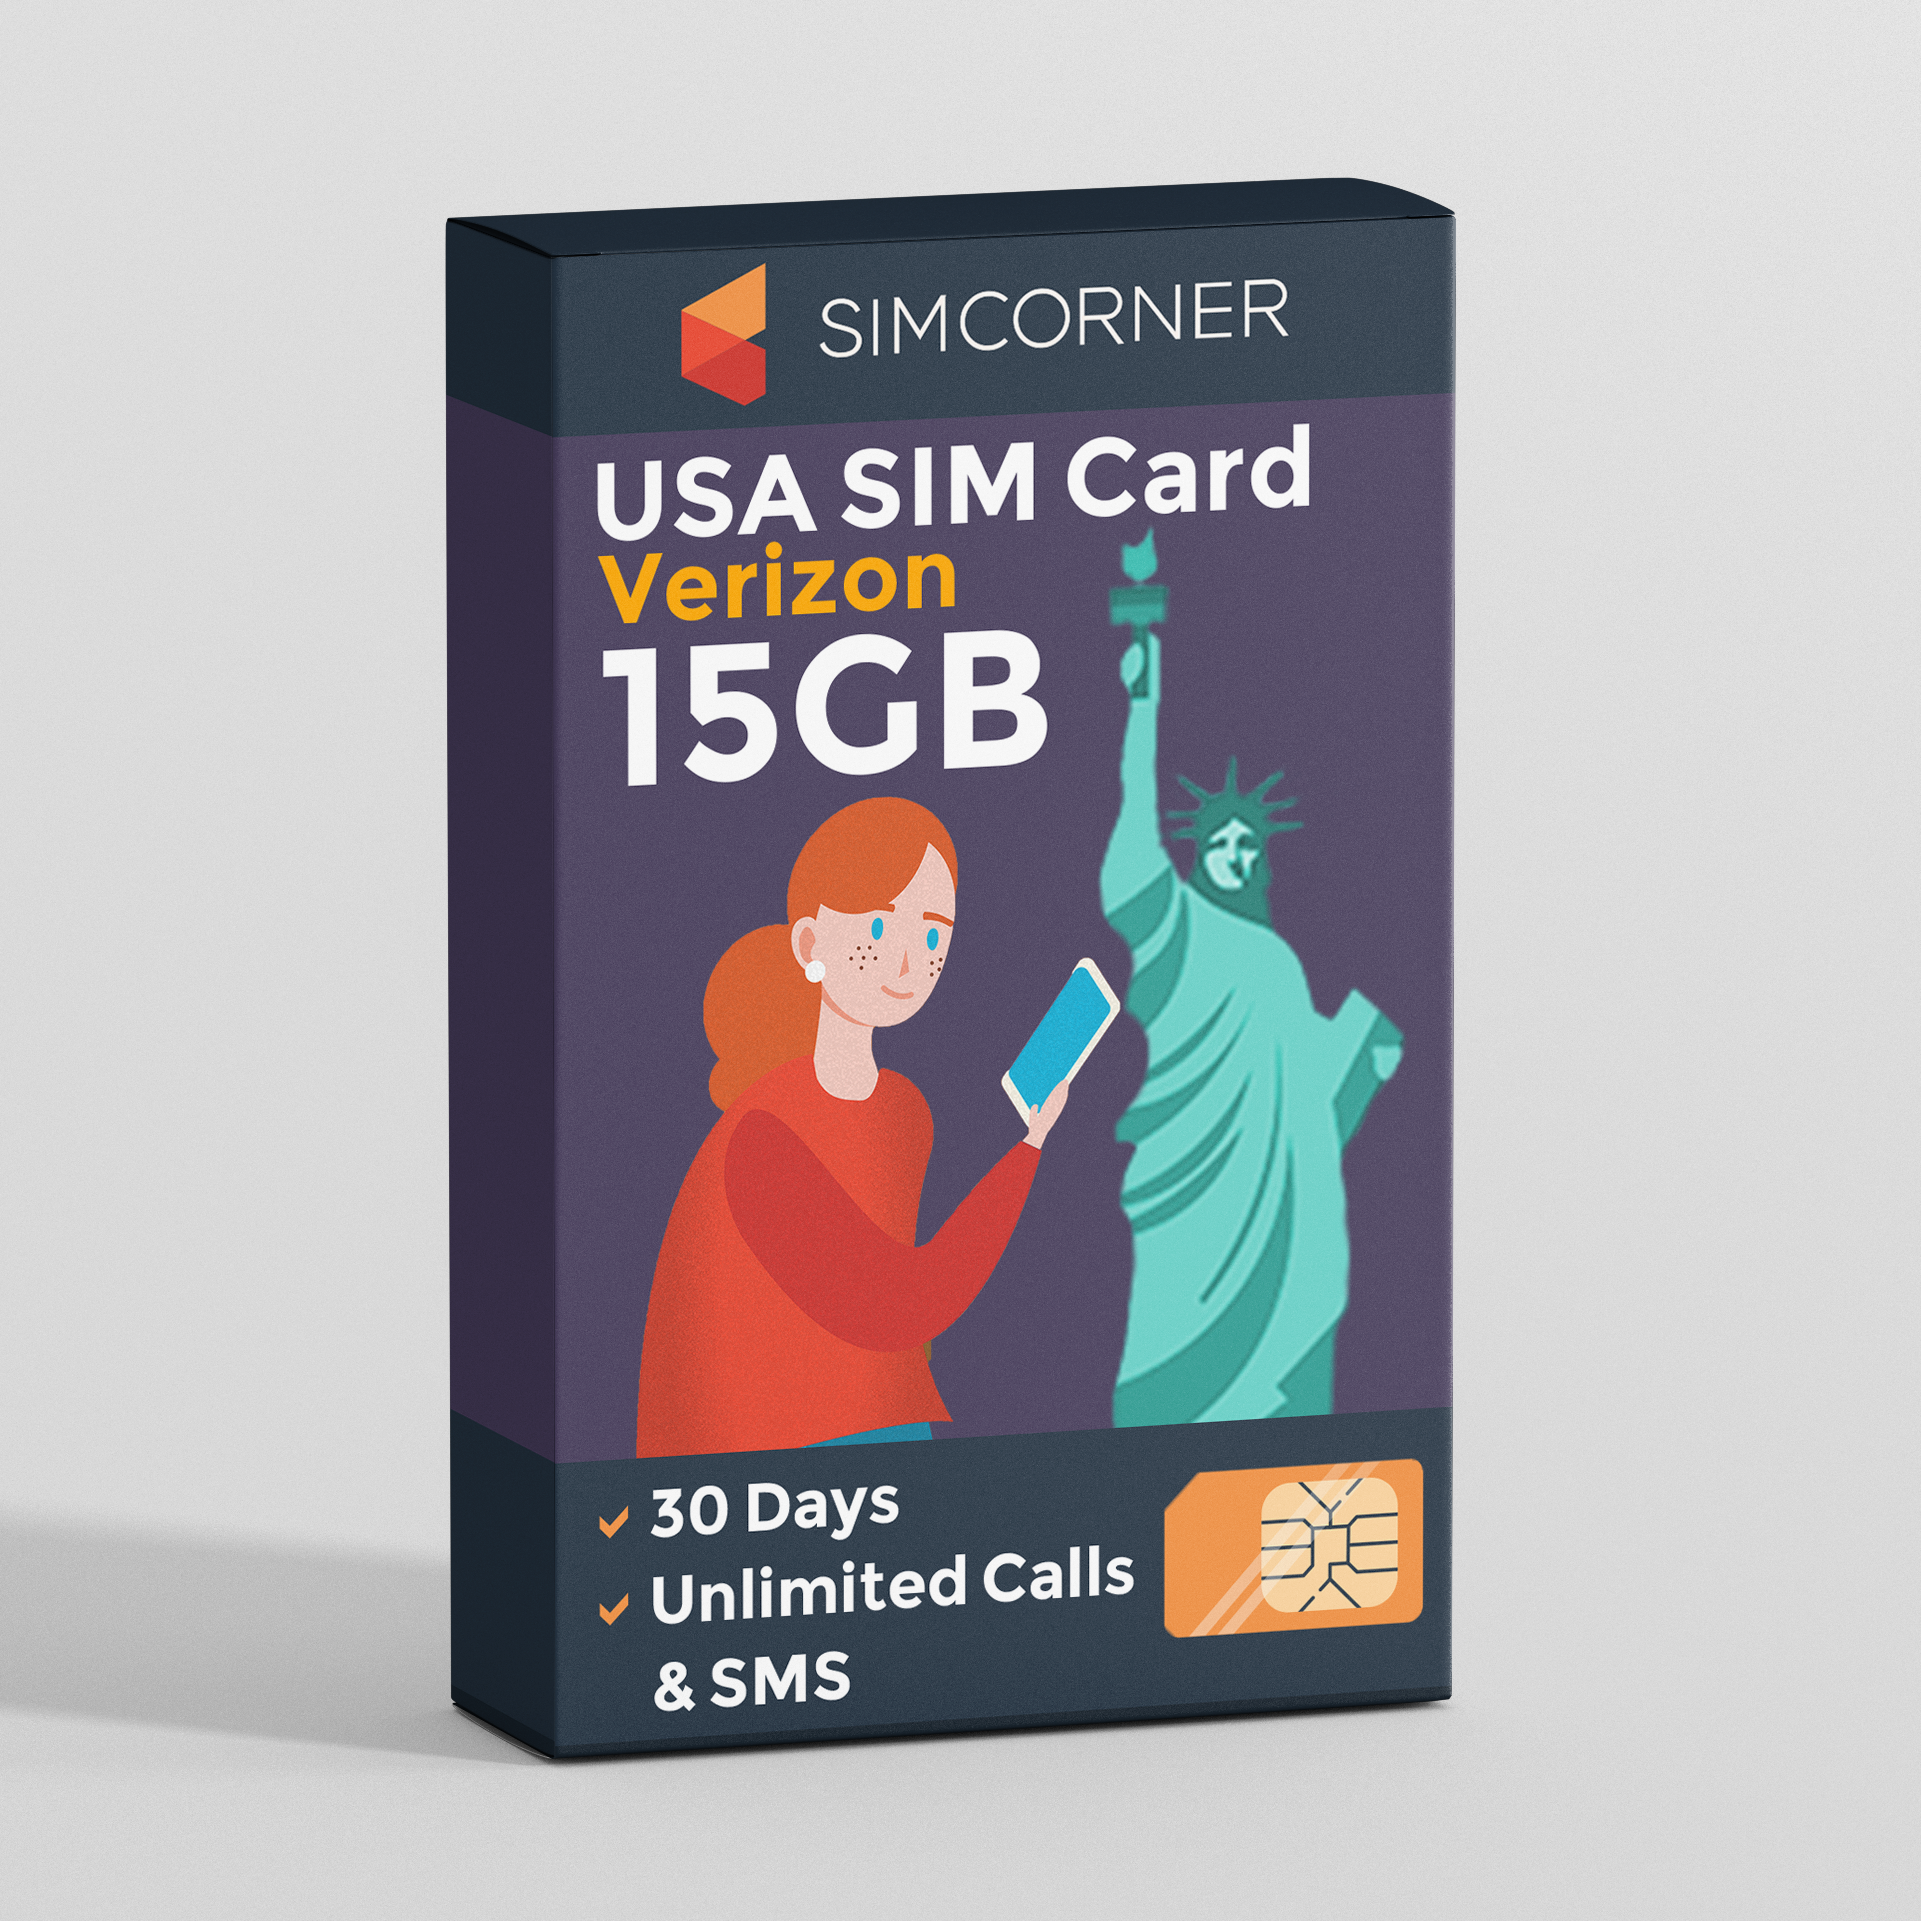 Prepaid USA SIM cards for travellers now on sale in Australia